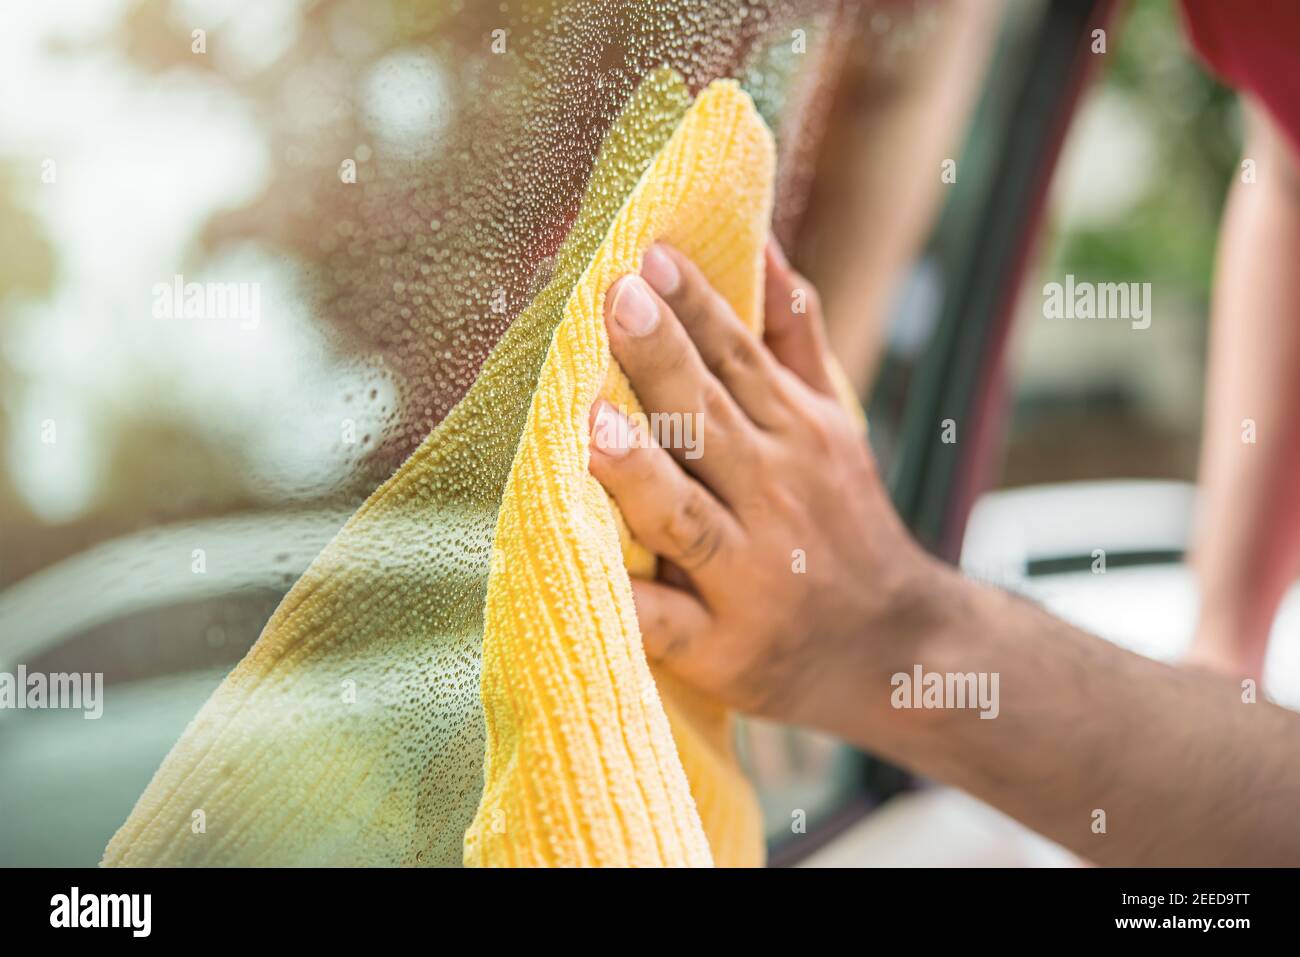 Auto care service staff cleaning car window glass with microfiber cloth Stock Photo